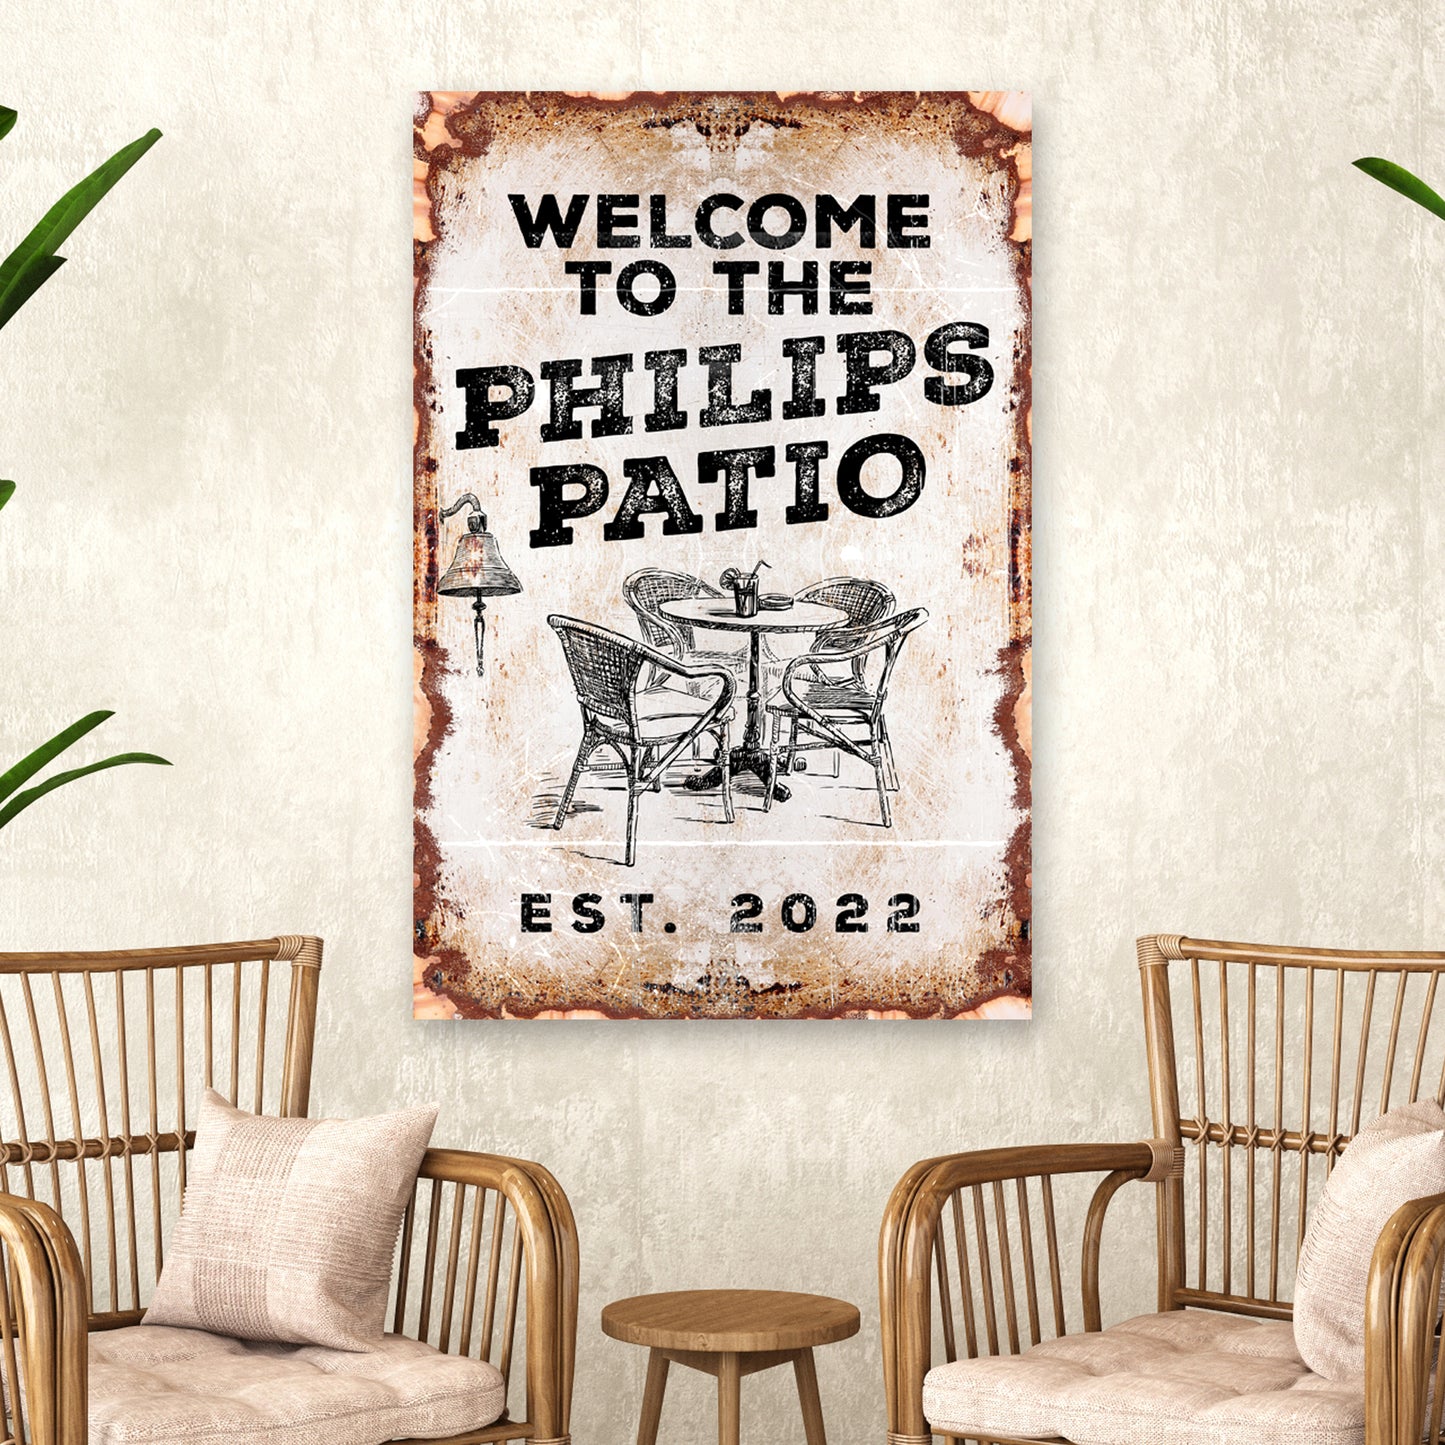 Welcome To The Patio Sign III - Image by Tailored Canvases